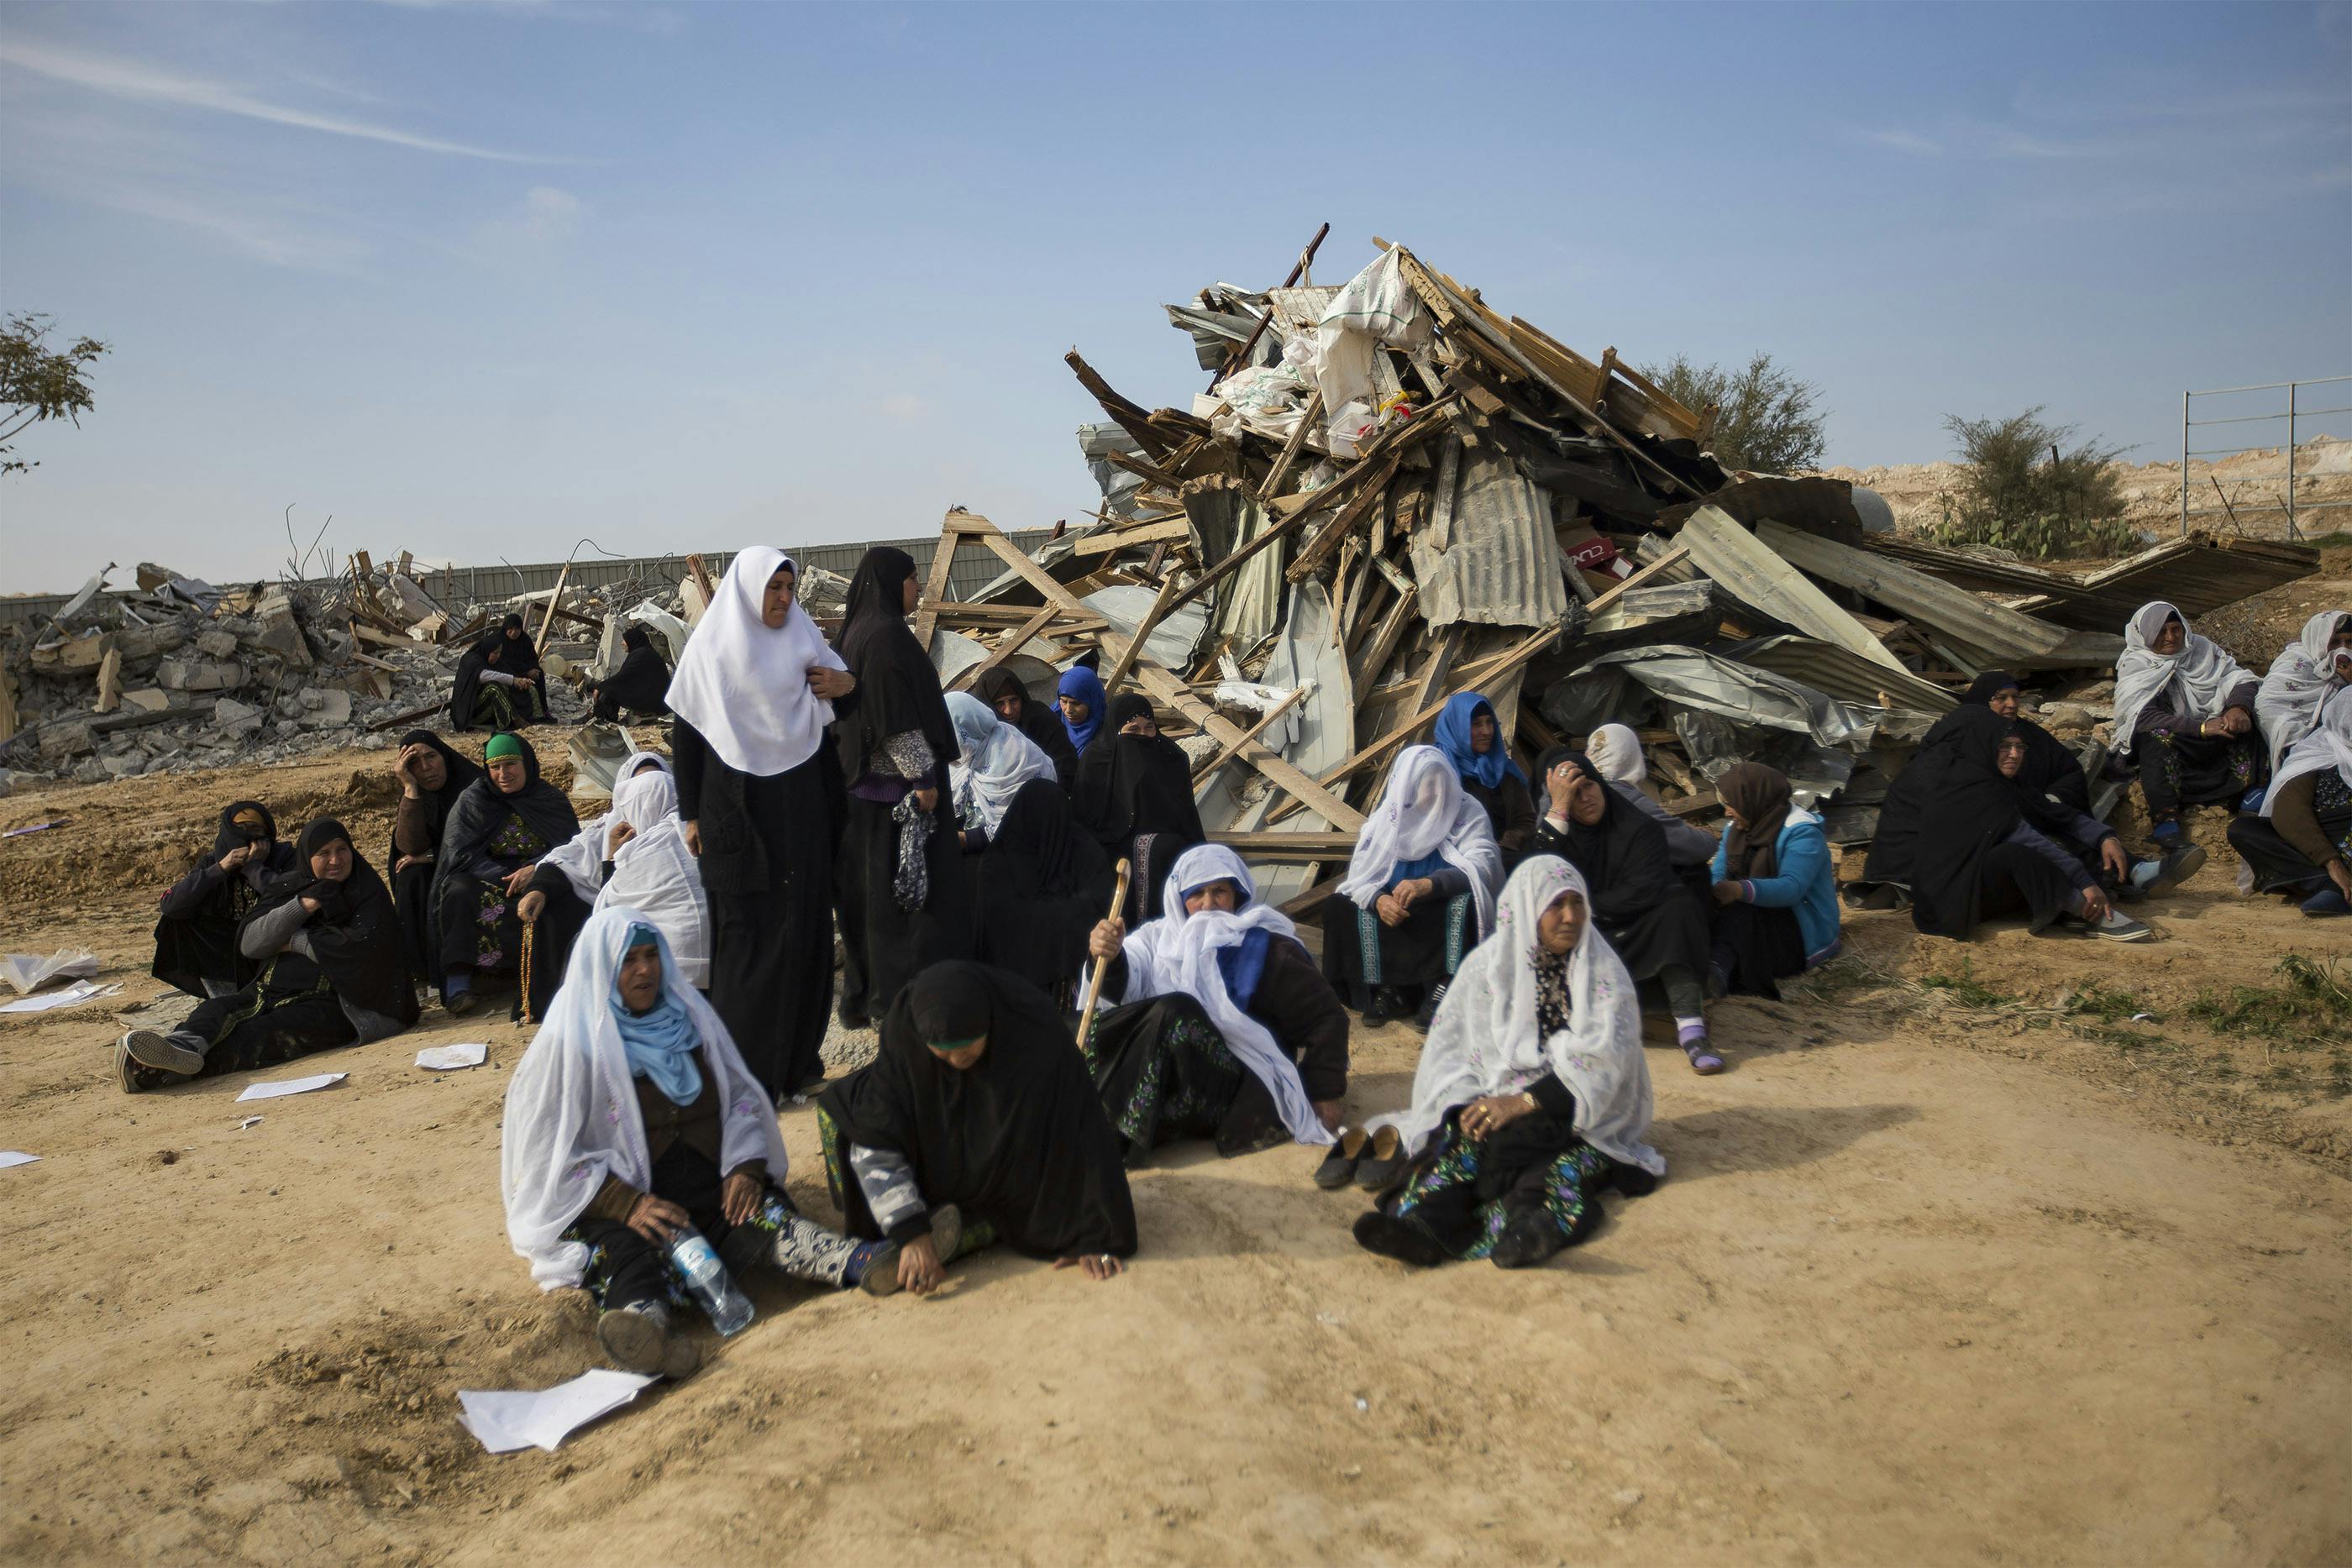  Bedouin women sit next to the ruins of their demolished houses in the unrecognized Bedouin village of Umm Al-Hiran, in the Negev desert, Israel, January 18, 2017. A resident and an Israeli policeman were killed during the operation. Israeli authorities said the policeman was killed in a car-ramming attack, while residences and activists claimed the driver was first shot dead by the police, with no apparent reason, before losing control of his car and driving towards the policemen. The Israeli state plans to completely demolish the village in order to build a Jewish-only town on that land.  	Faiz Abu Rmeleh